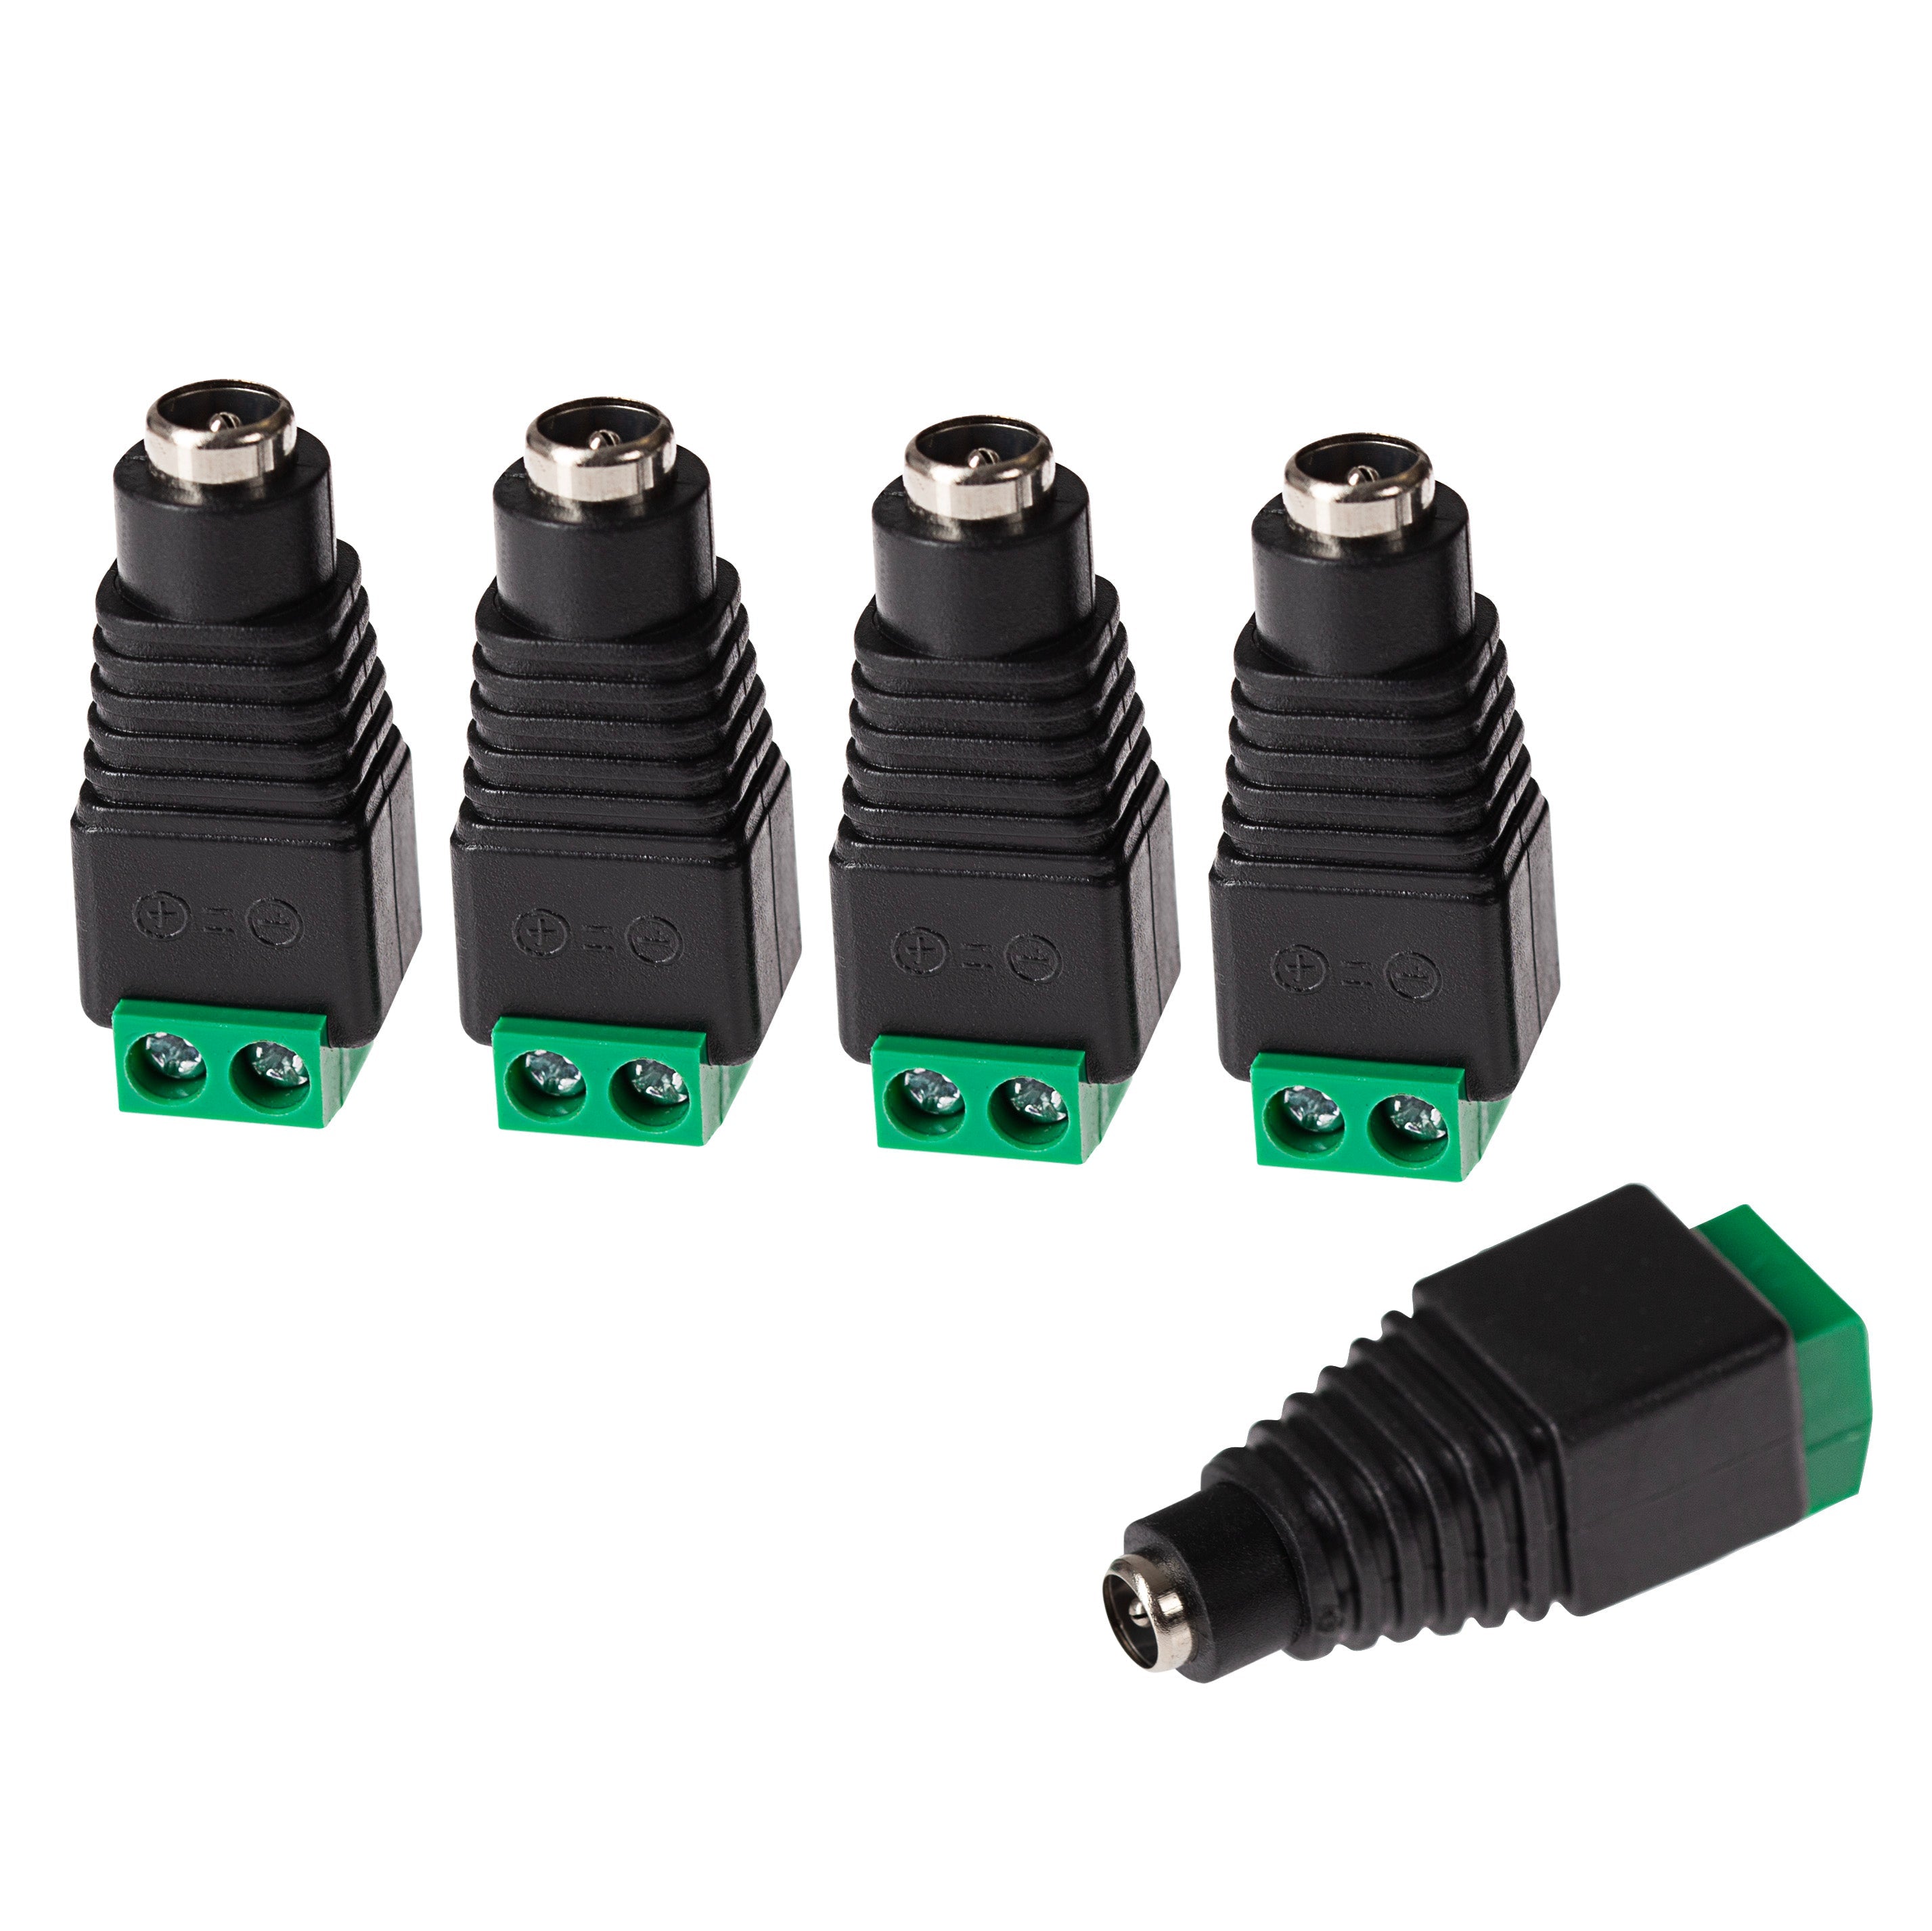 Maplin Female DC to Twin Cable to 5.5 x 2.1mm DC Power Plug for CCTV - Black, Pack of 5